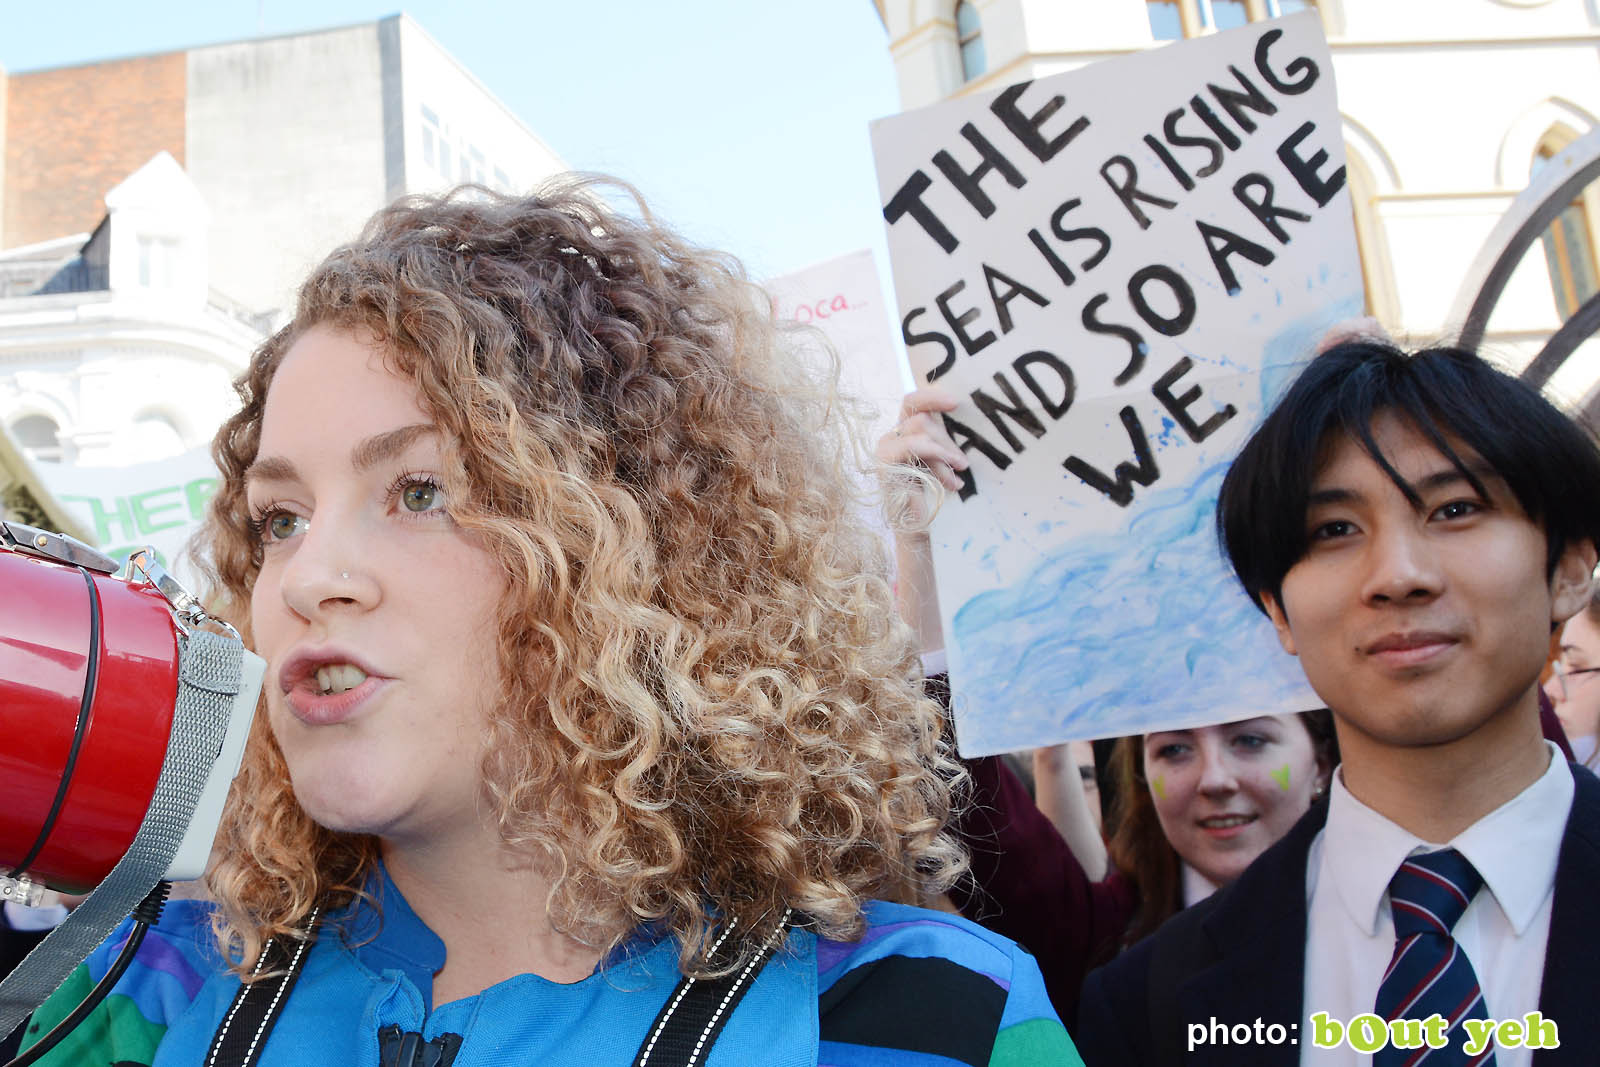 School children and banner at the strike for climate protest in Belfast. Photo 8940 by Bout Yeh photographers Belfast